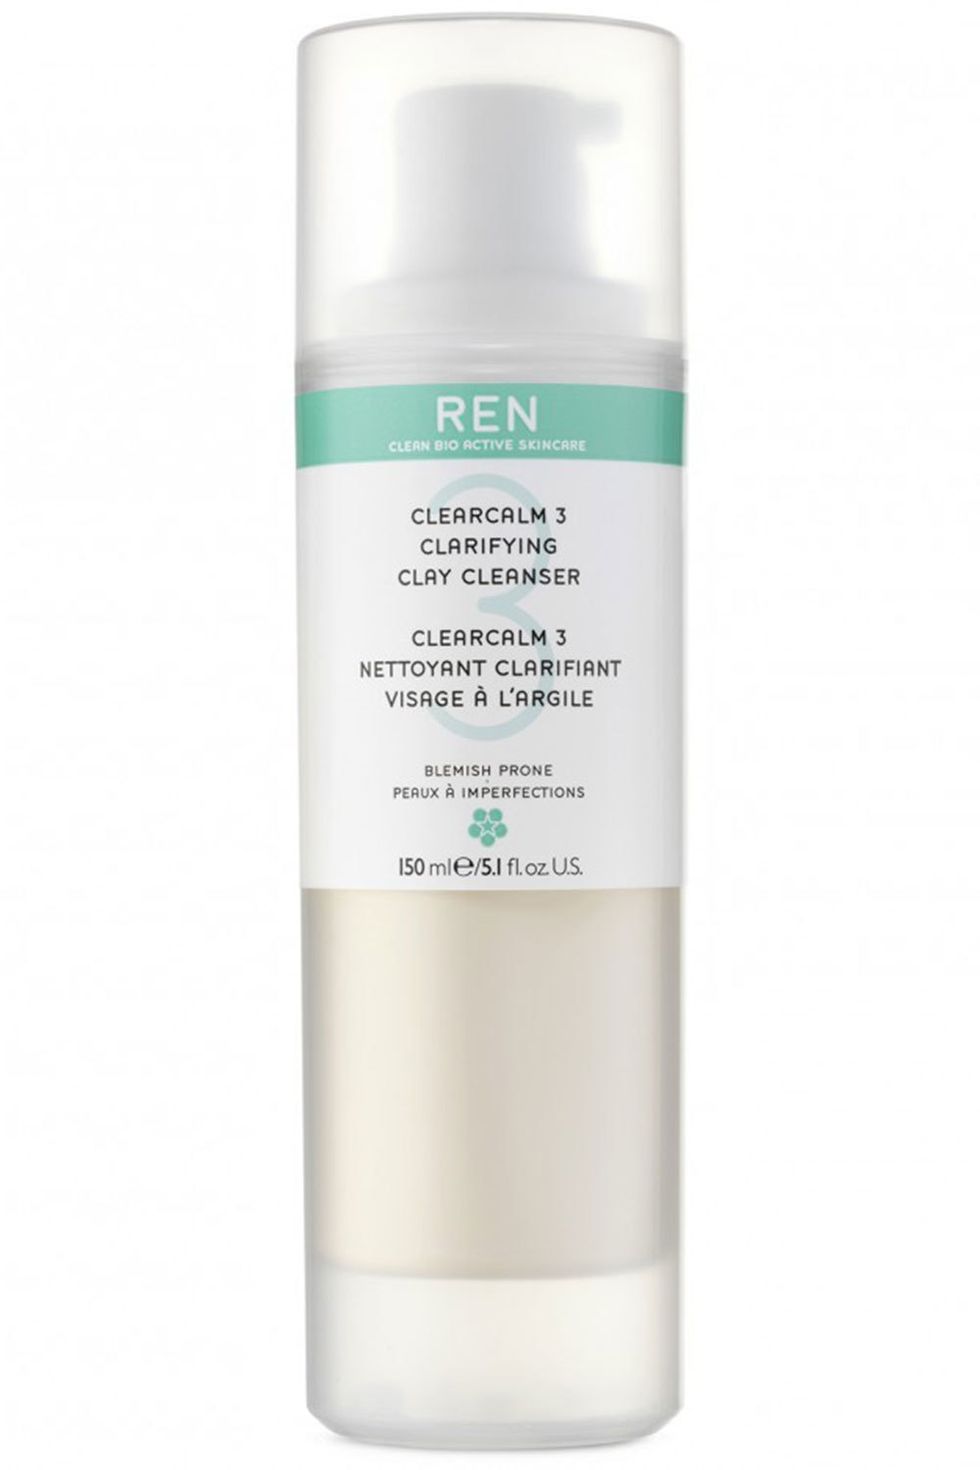 The clarifying cleanser